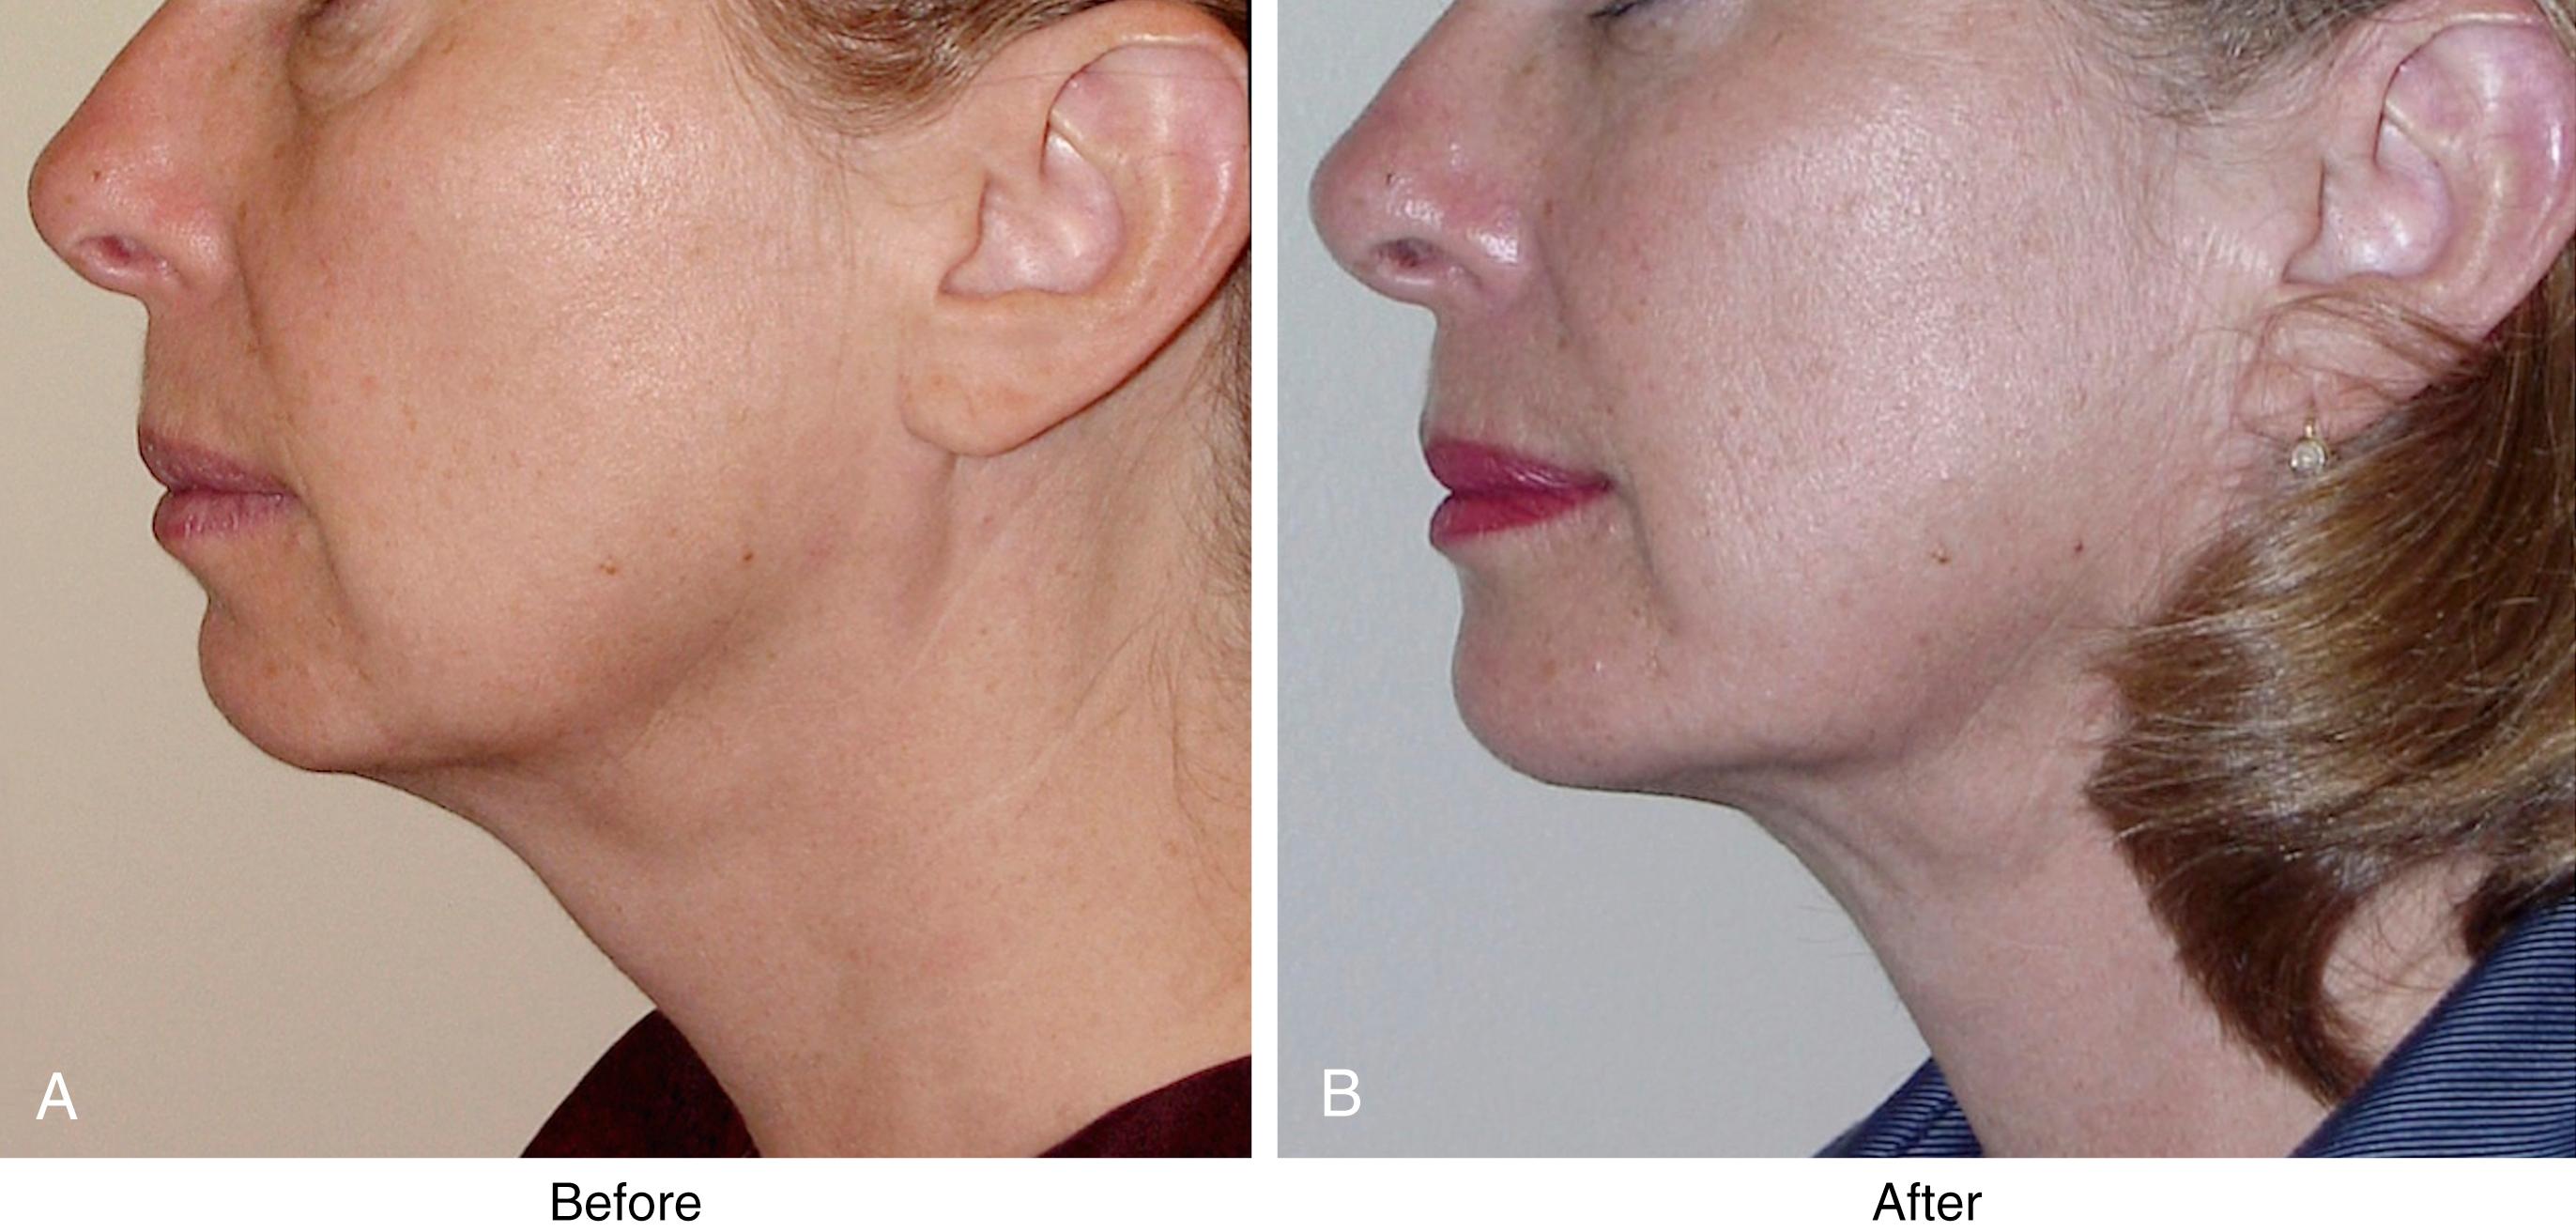 Fig. 67.3, (A,B) Typical outcome seen with submental liposuction. Submental liposuction is an incomplete solution to neck problems for most patients as it falsely assumes that poor neck contour is solely the result of the accumulation of subcutaneous fat, and it does not address platysma laxity and other deep layer problems which usually play a much larger role in the aging neck. Note that the large submandibular salivary gland is still present, platysma laxity has not been corrected, and aggressive fat removal has made platysma bands more obvious.